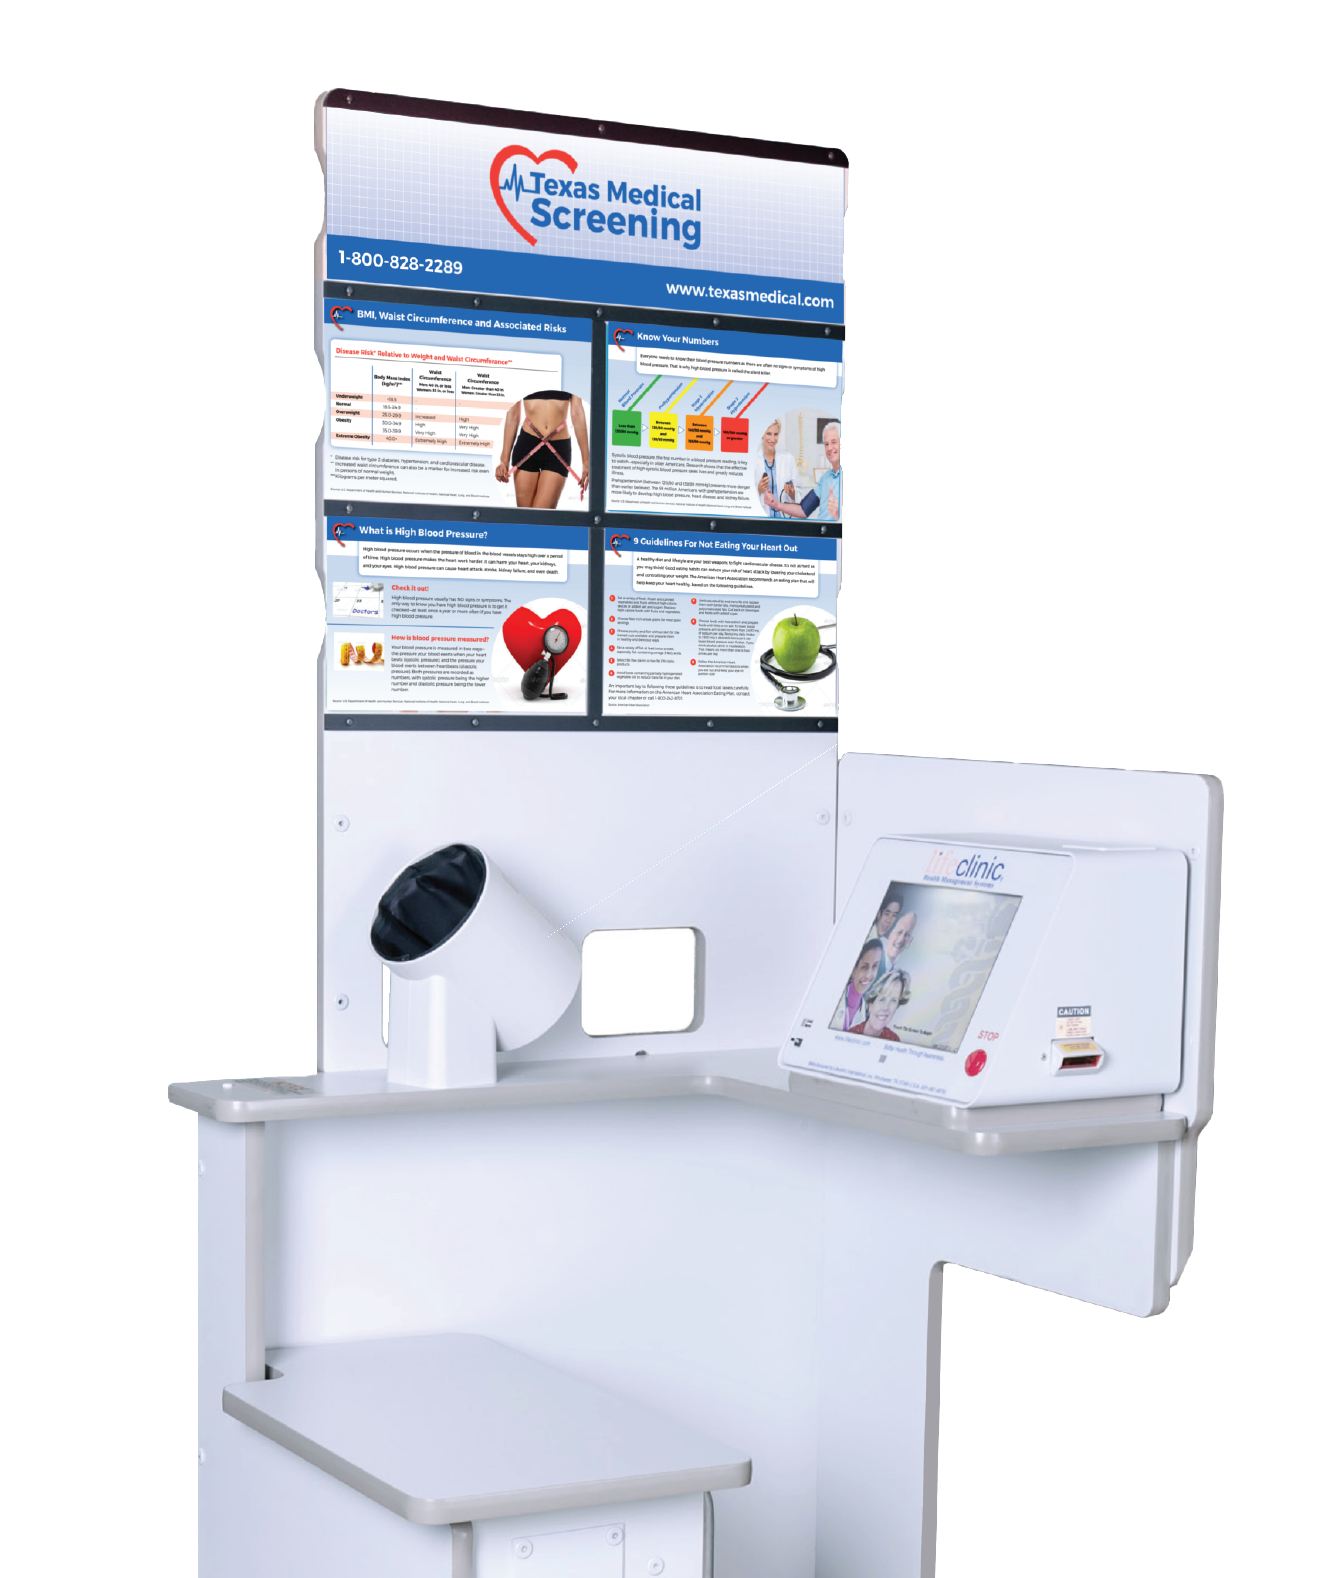 LC 500 Medical Screening Product: Advanced screening solution for enhanced healthcare diagnostics